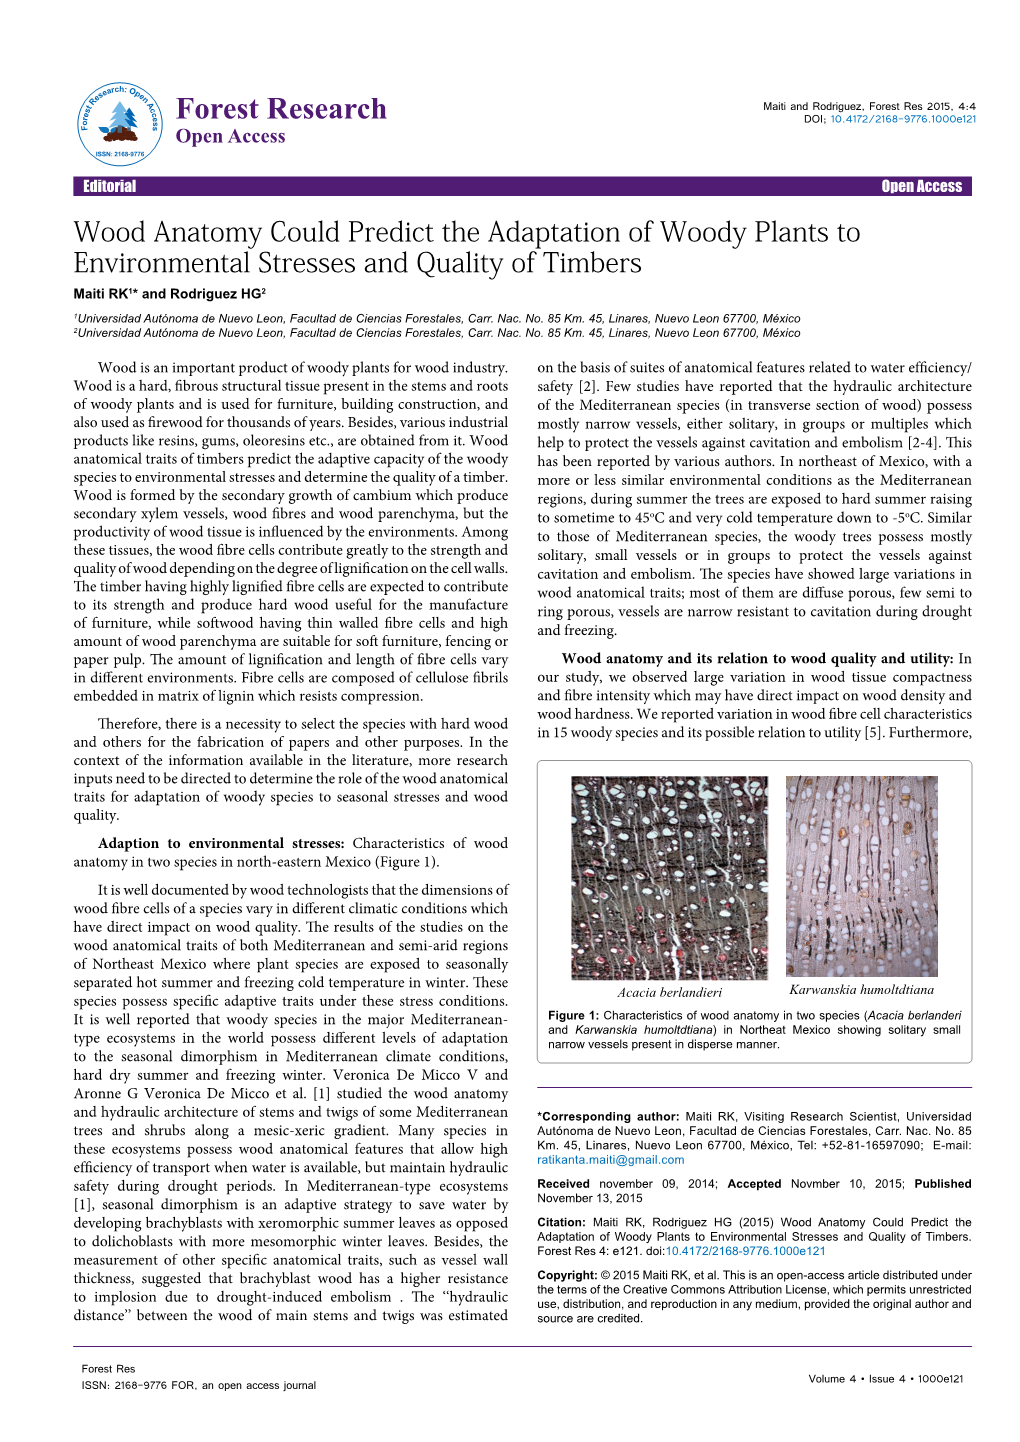 Wood Anatomy Could Predict the Adaption of Woody Plants To